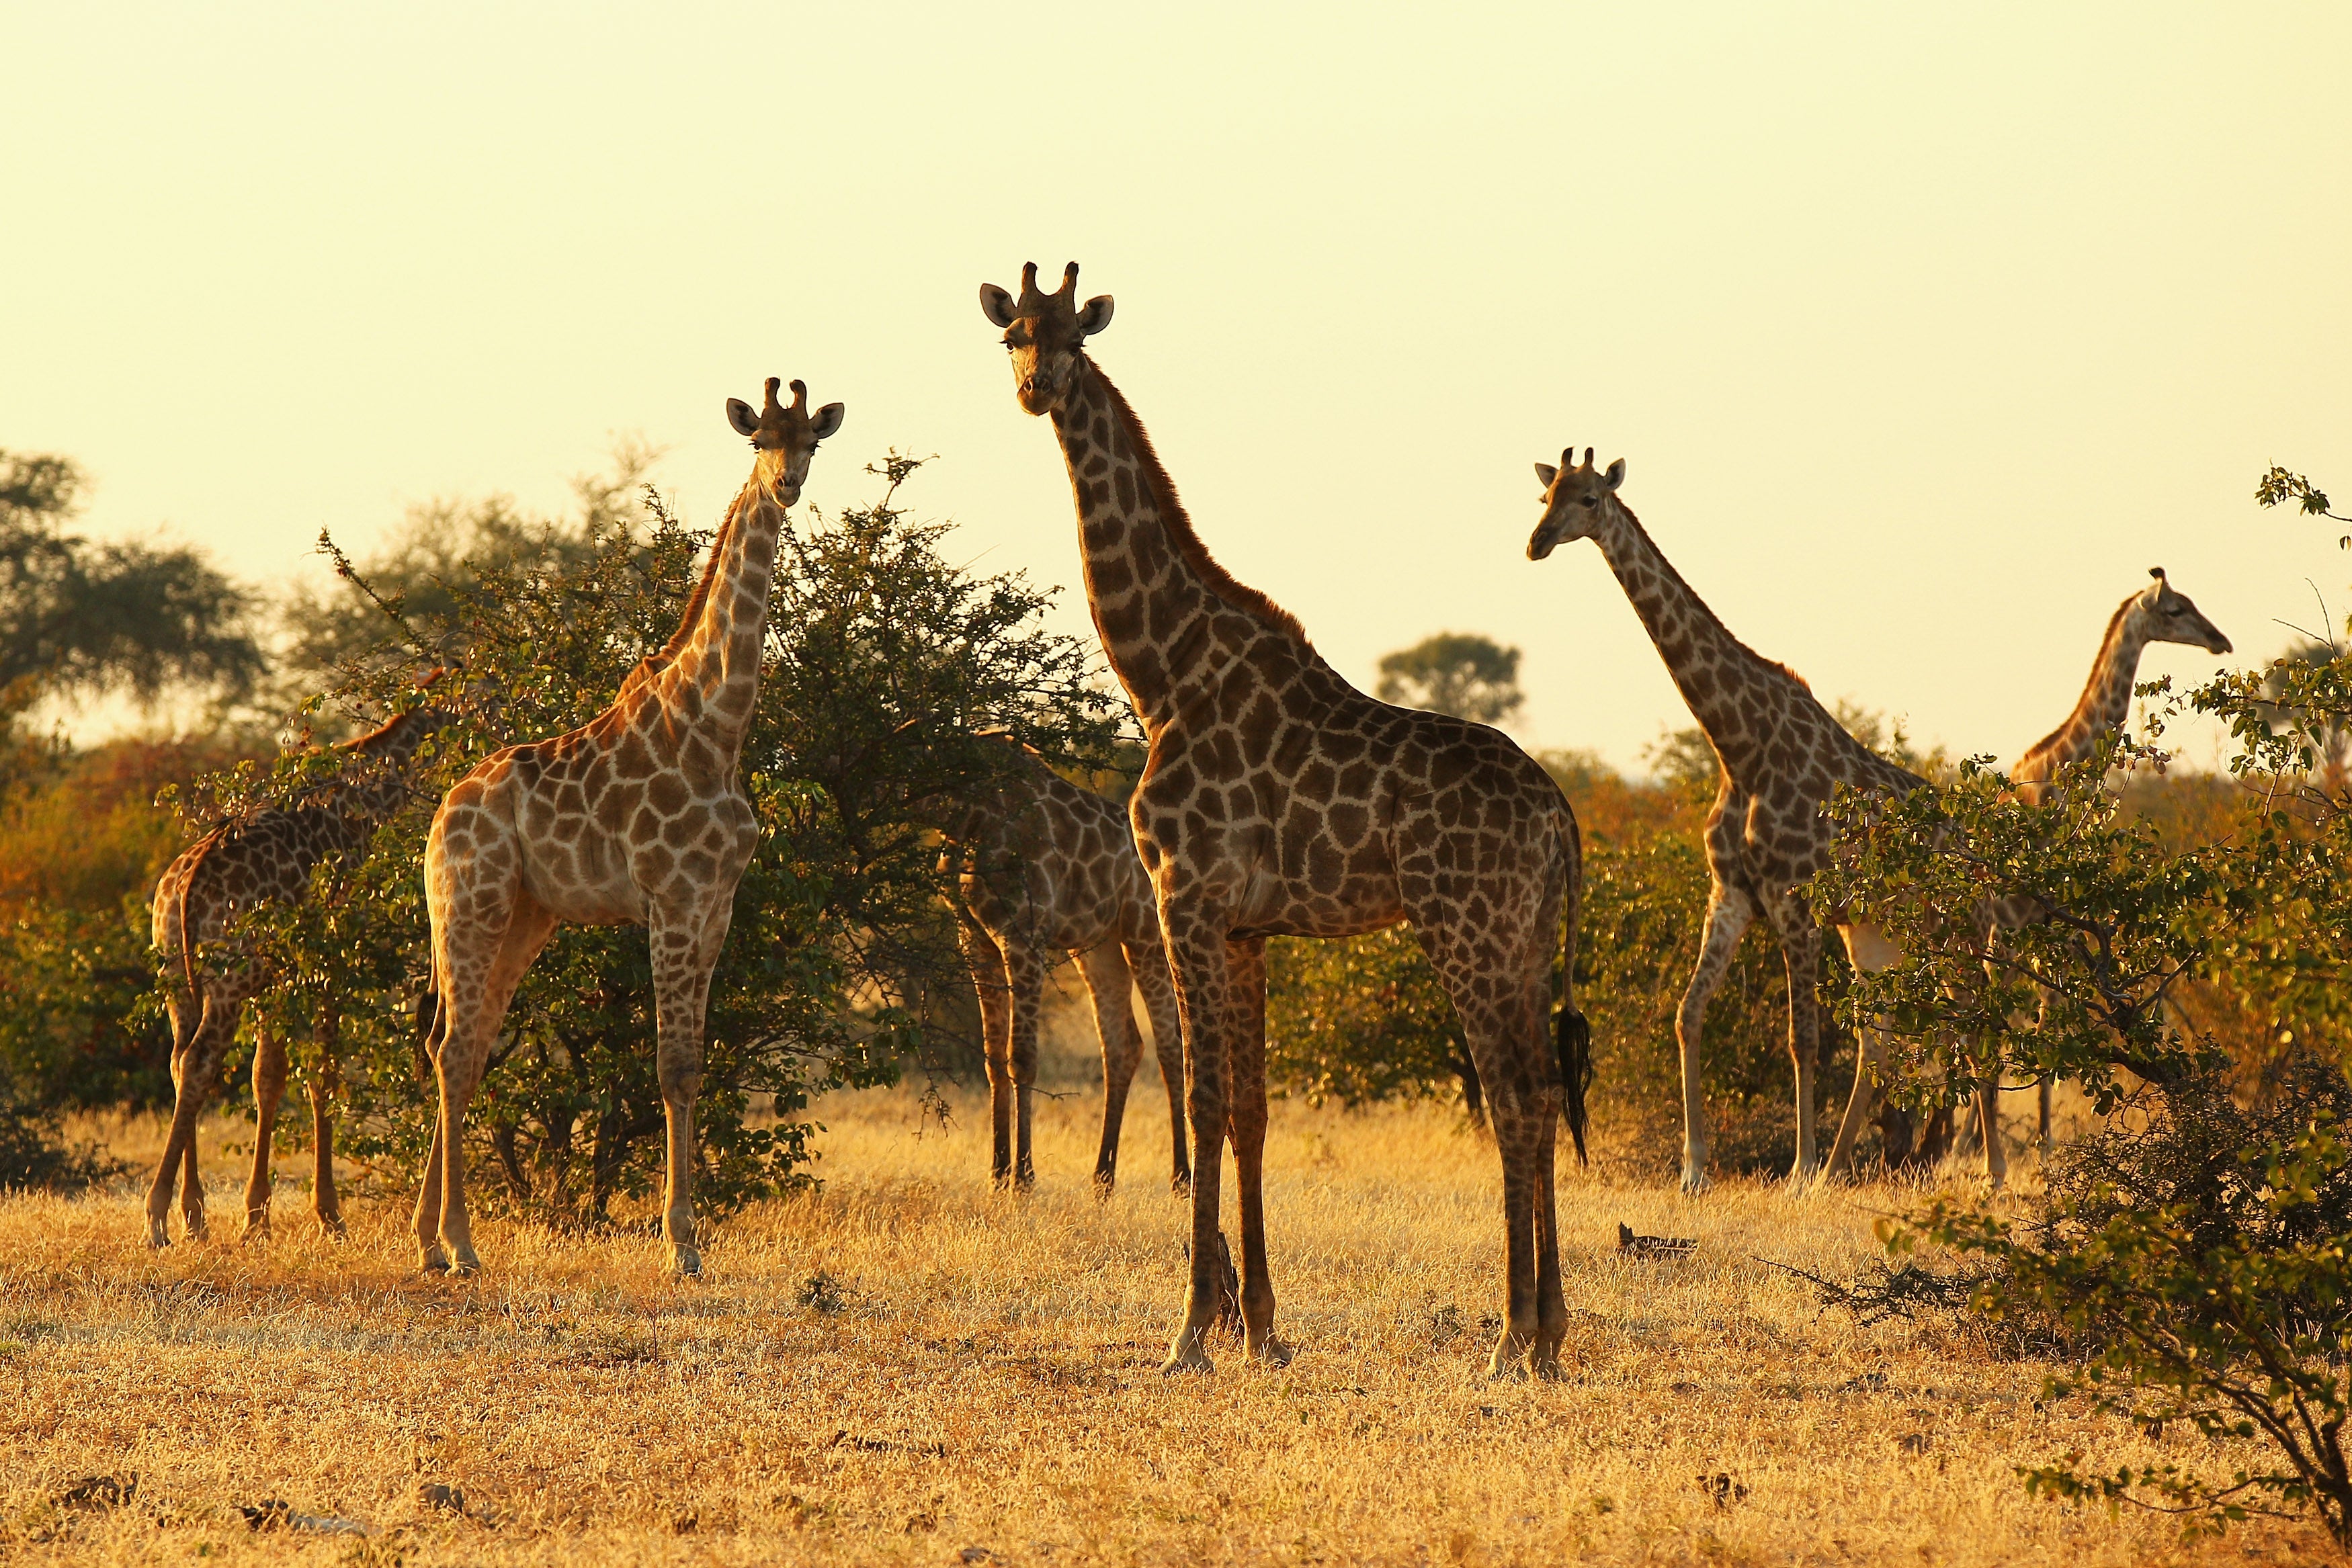 A tower of giraffes. (Photo: Cameron Spencer, Getty Images)